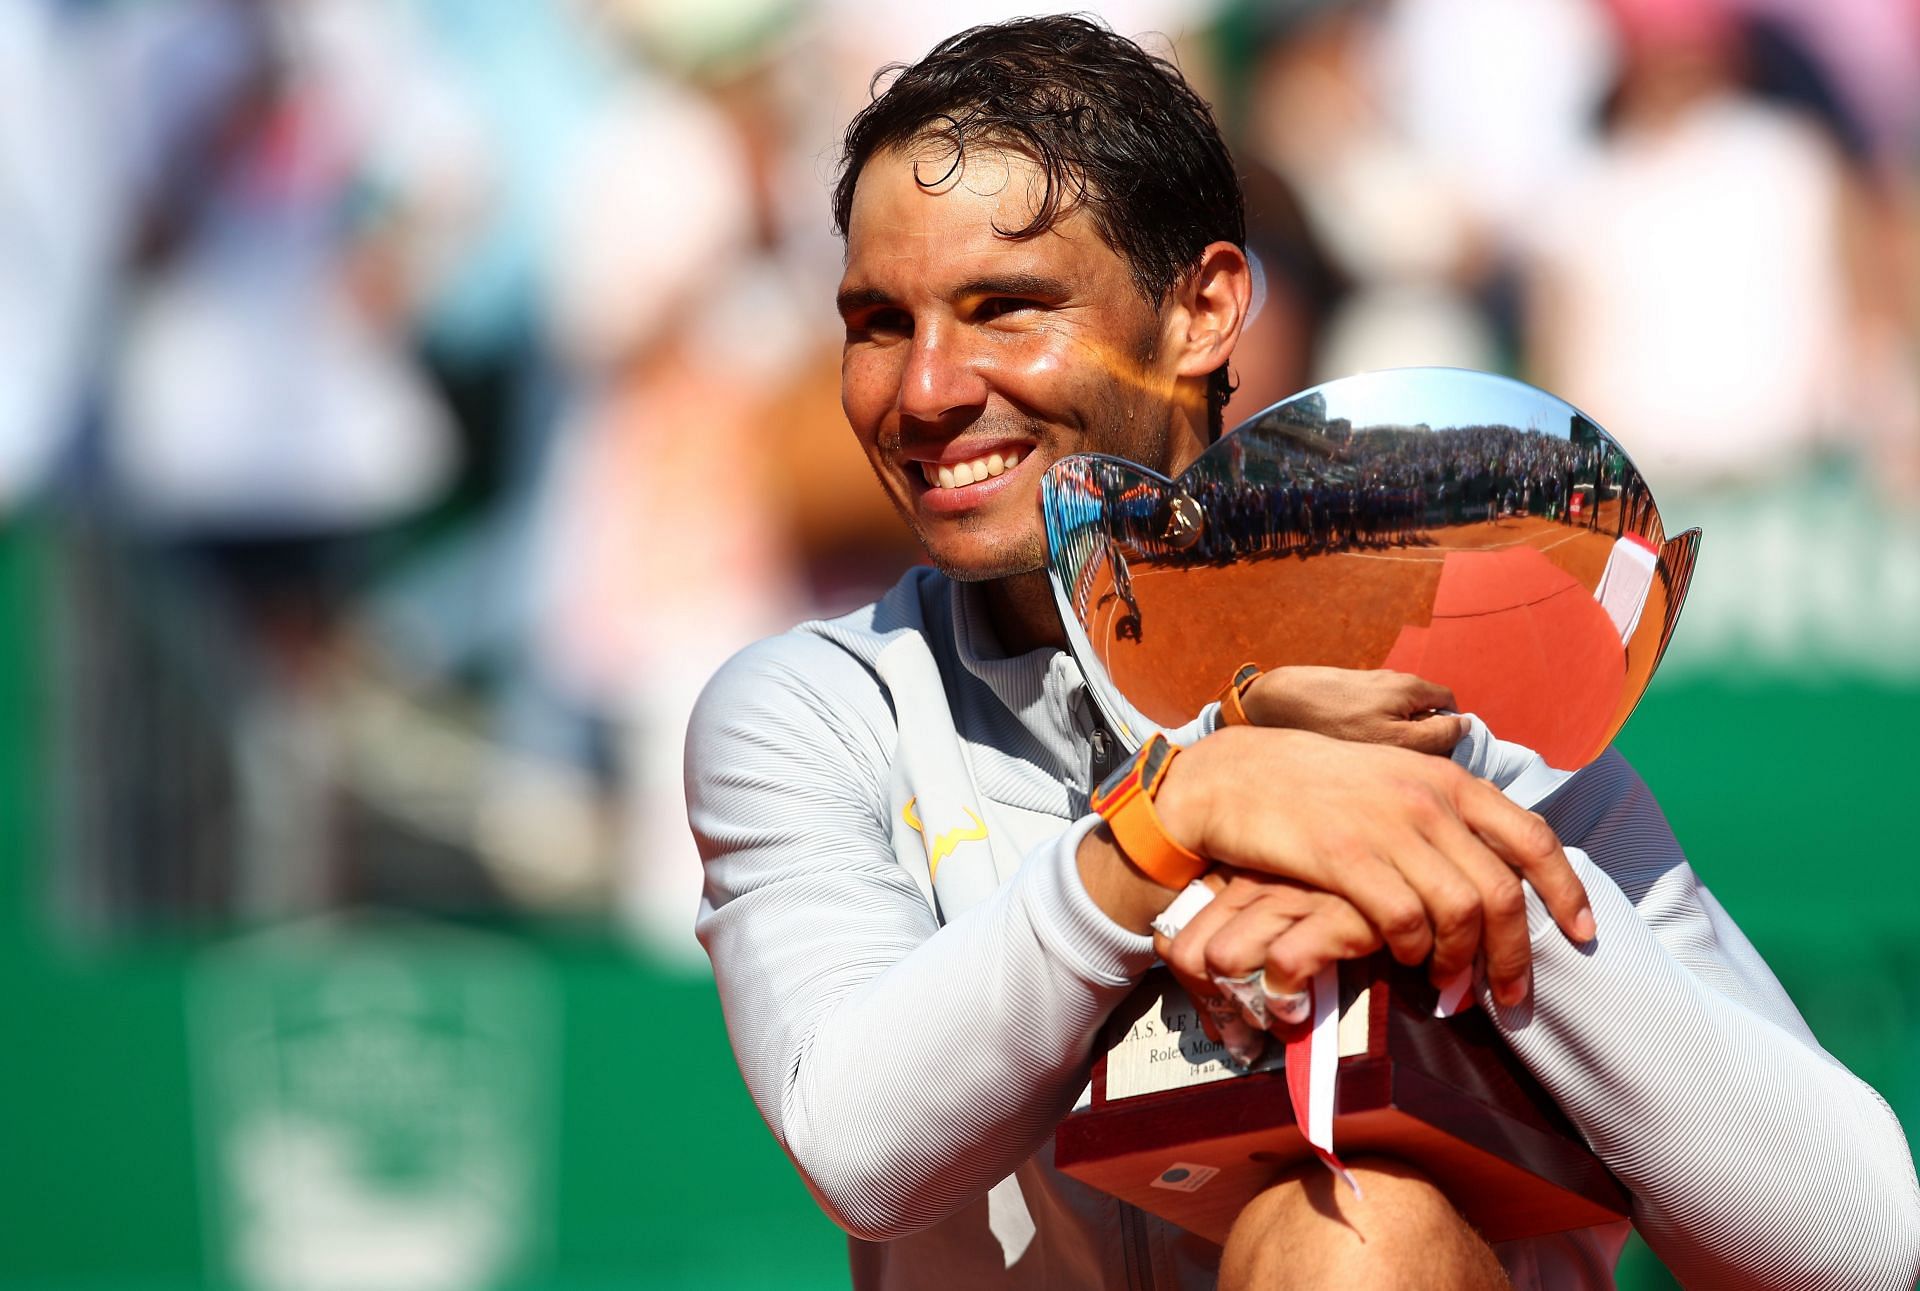 Rafael Nadal has won the Masters 1000 title 11 times